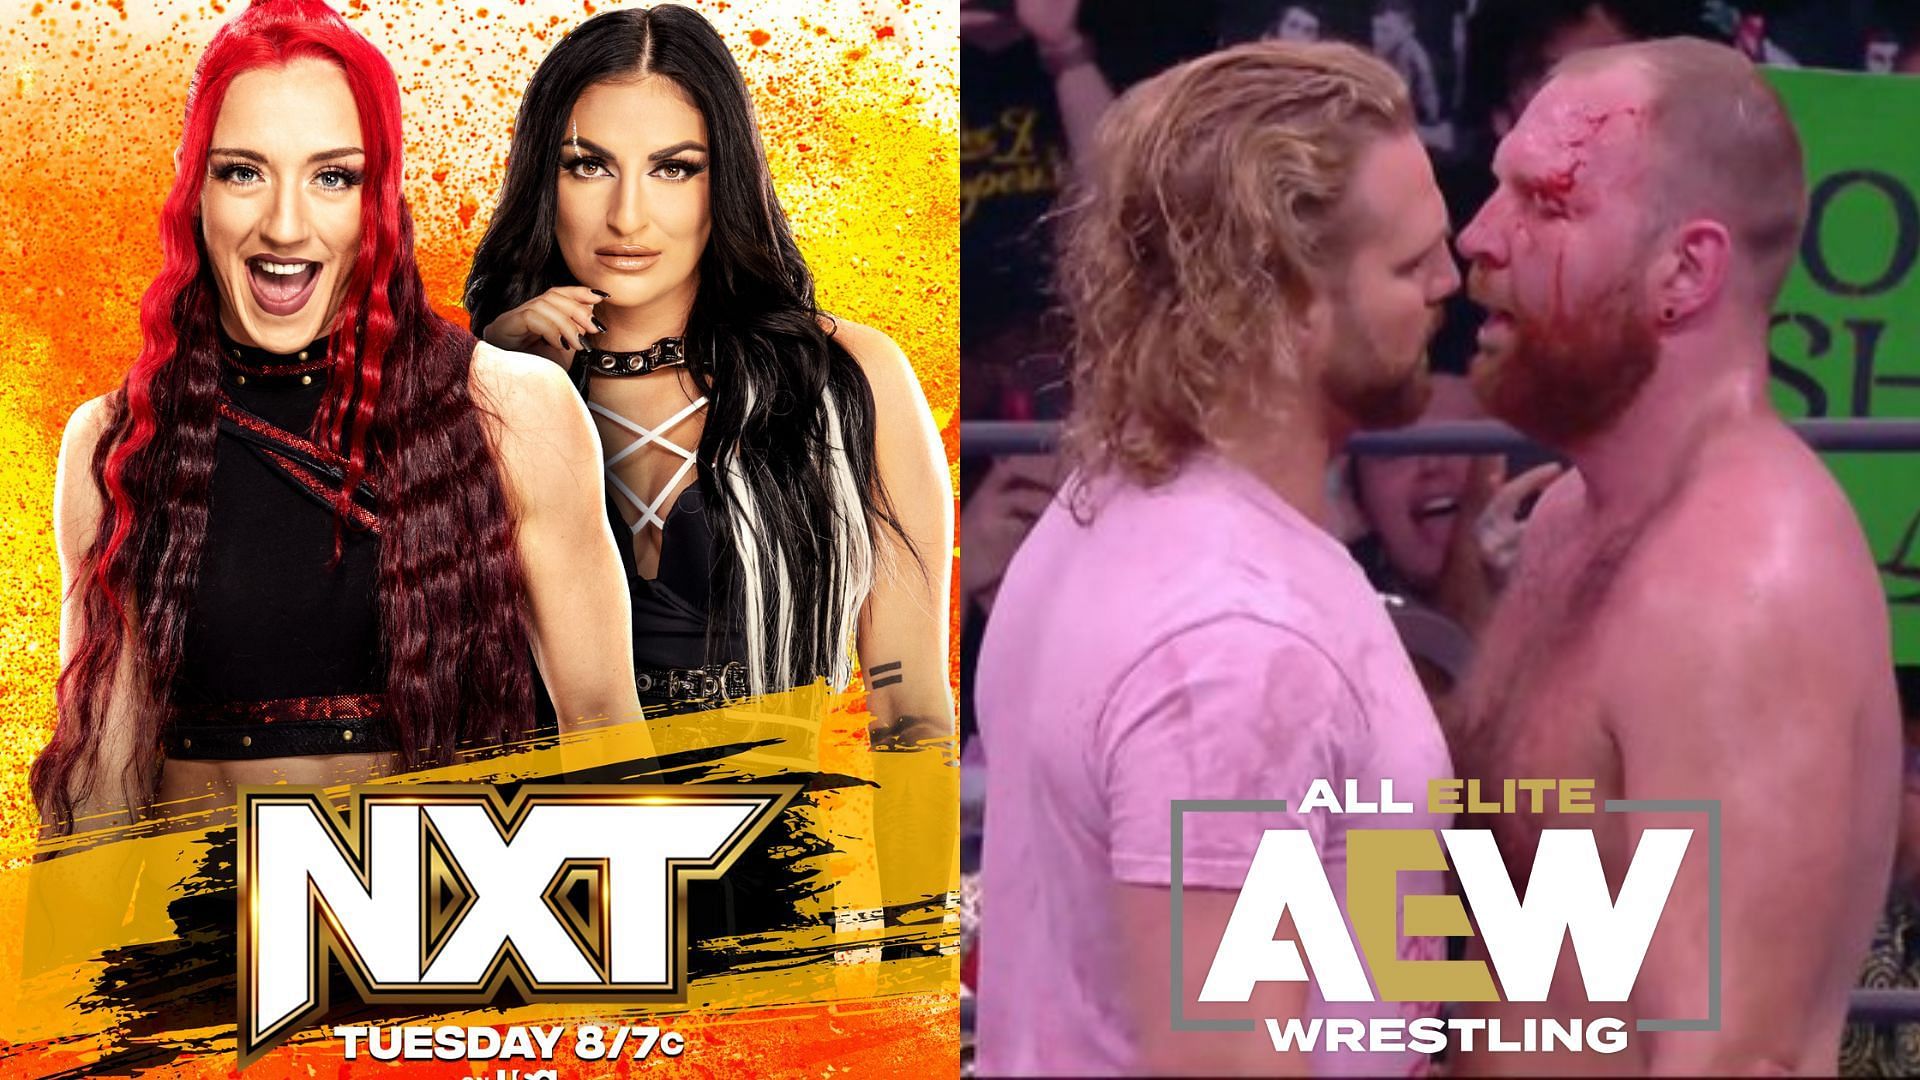 AEW Dynamite and WWE NXT will be going head to head again this week